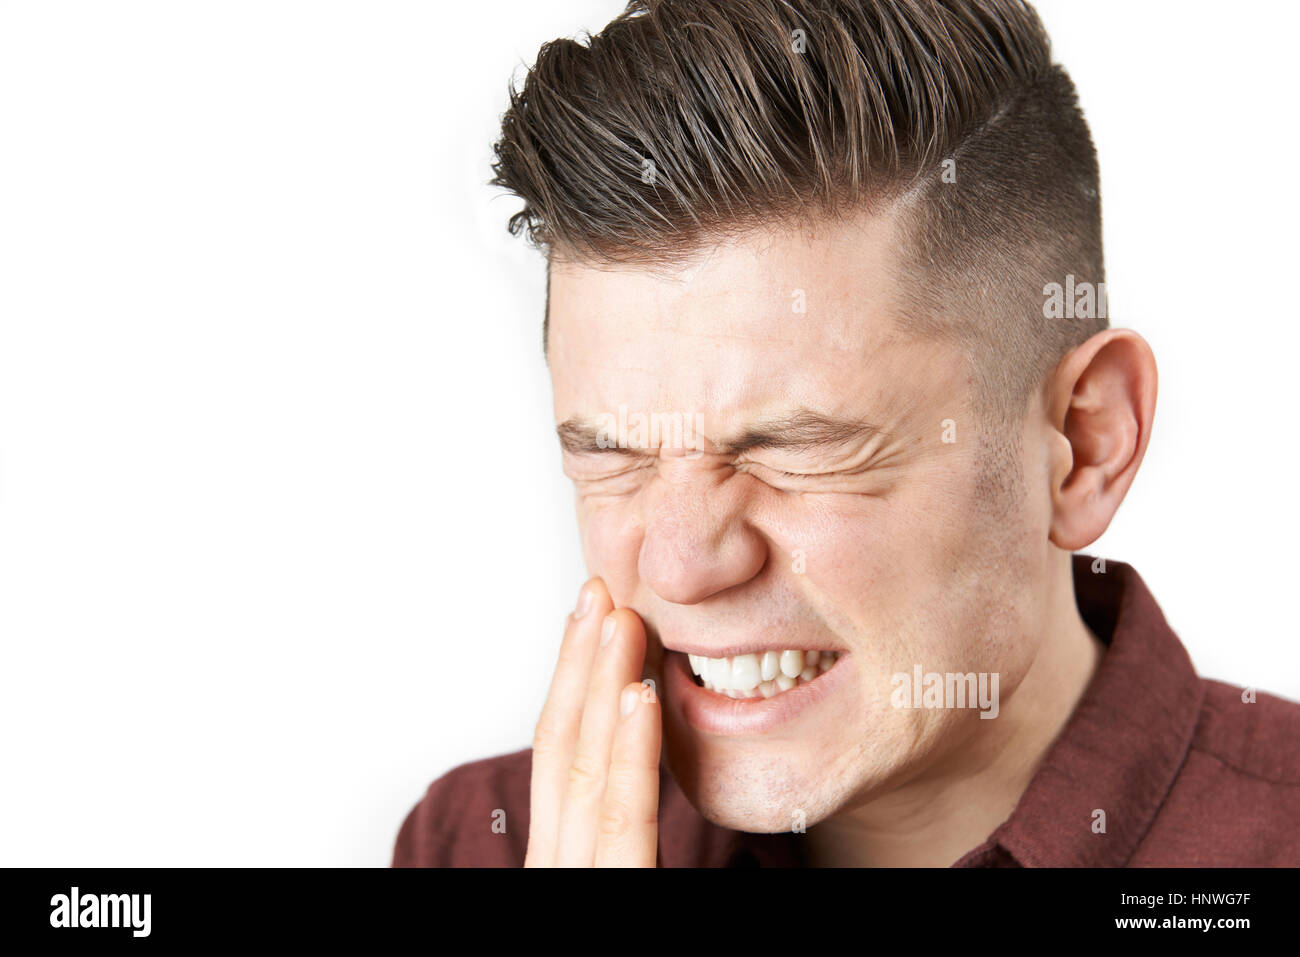 Studio Portrait Of Man Suffering With Toothache Stock Photo